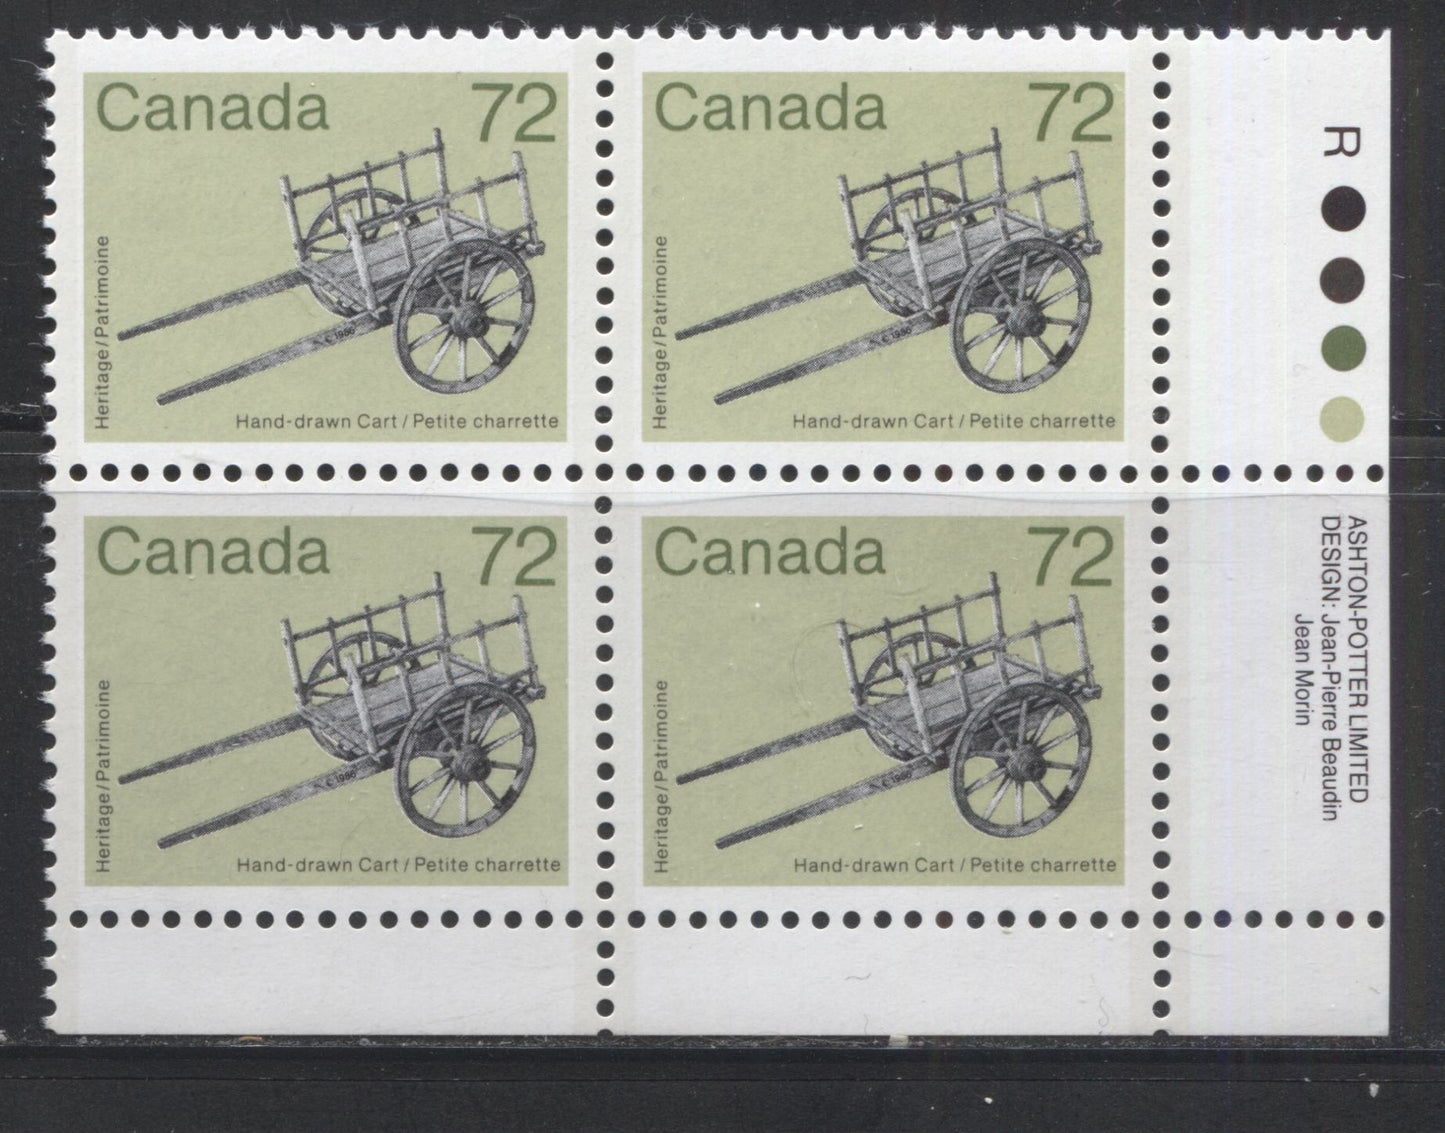 Canada #1083 72c Multicoloured Hand Drawn Cart, 1982-1987 Artifacts and National Parks Issue, A VFNH LR Inscription Block on LF/LF-fl Rolland Paper